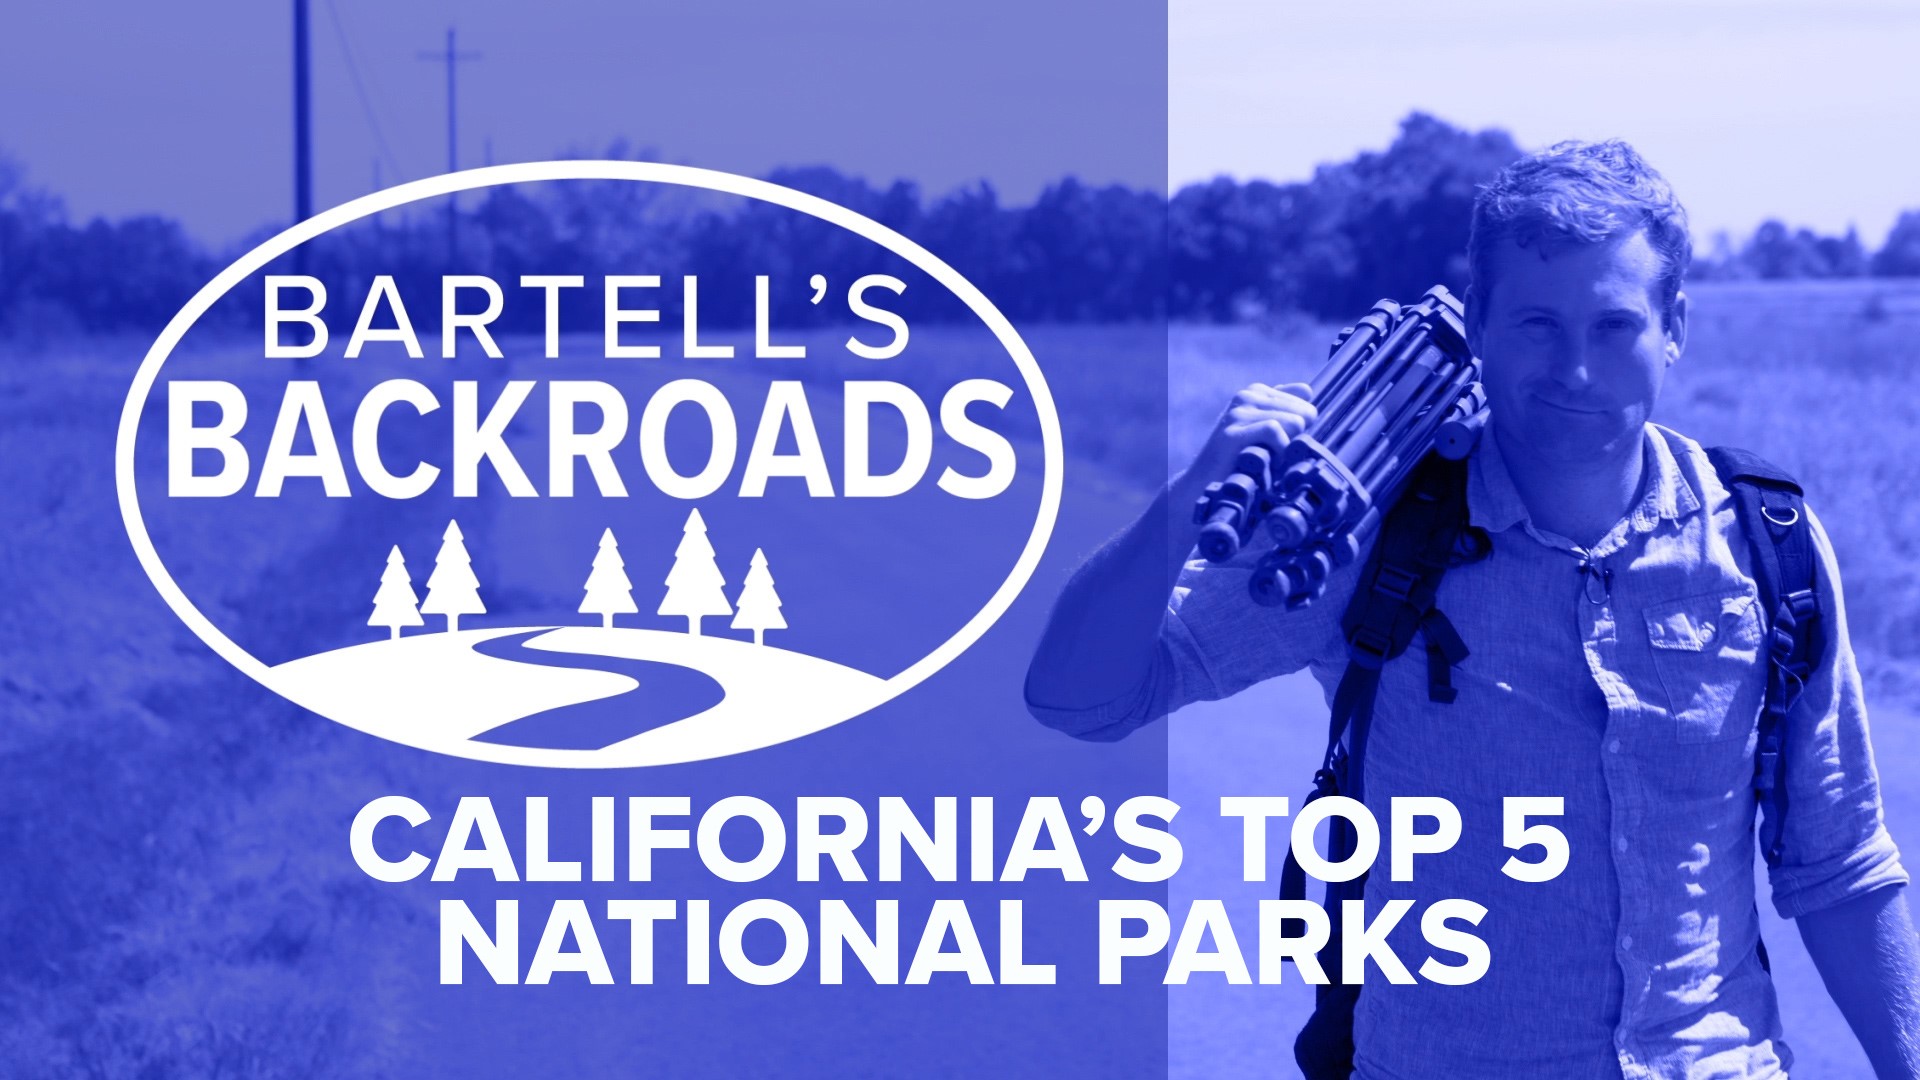 California has nine National Parks. Here are John Bartell's top five favorites.